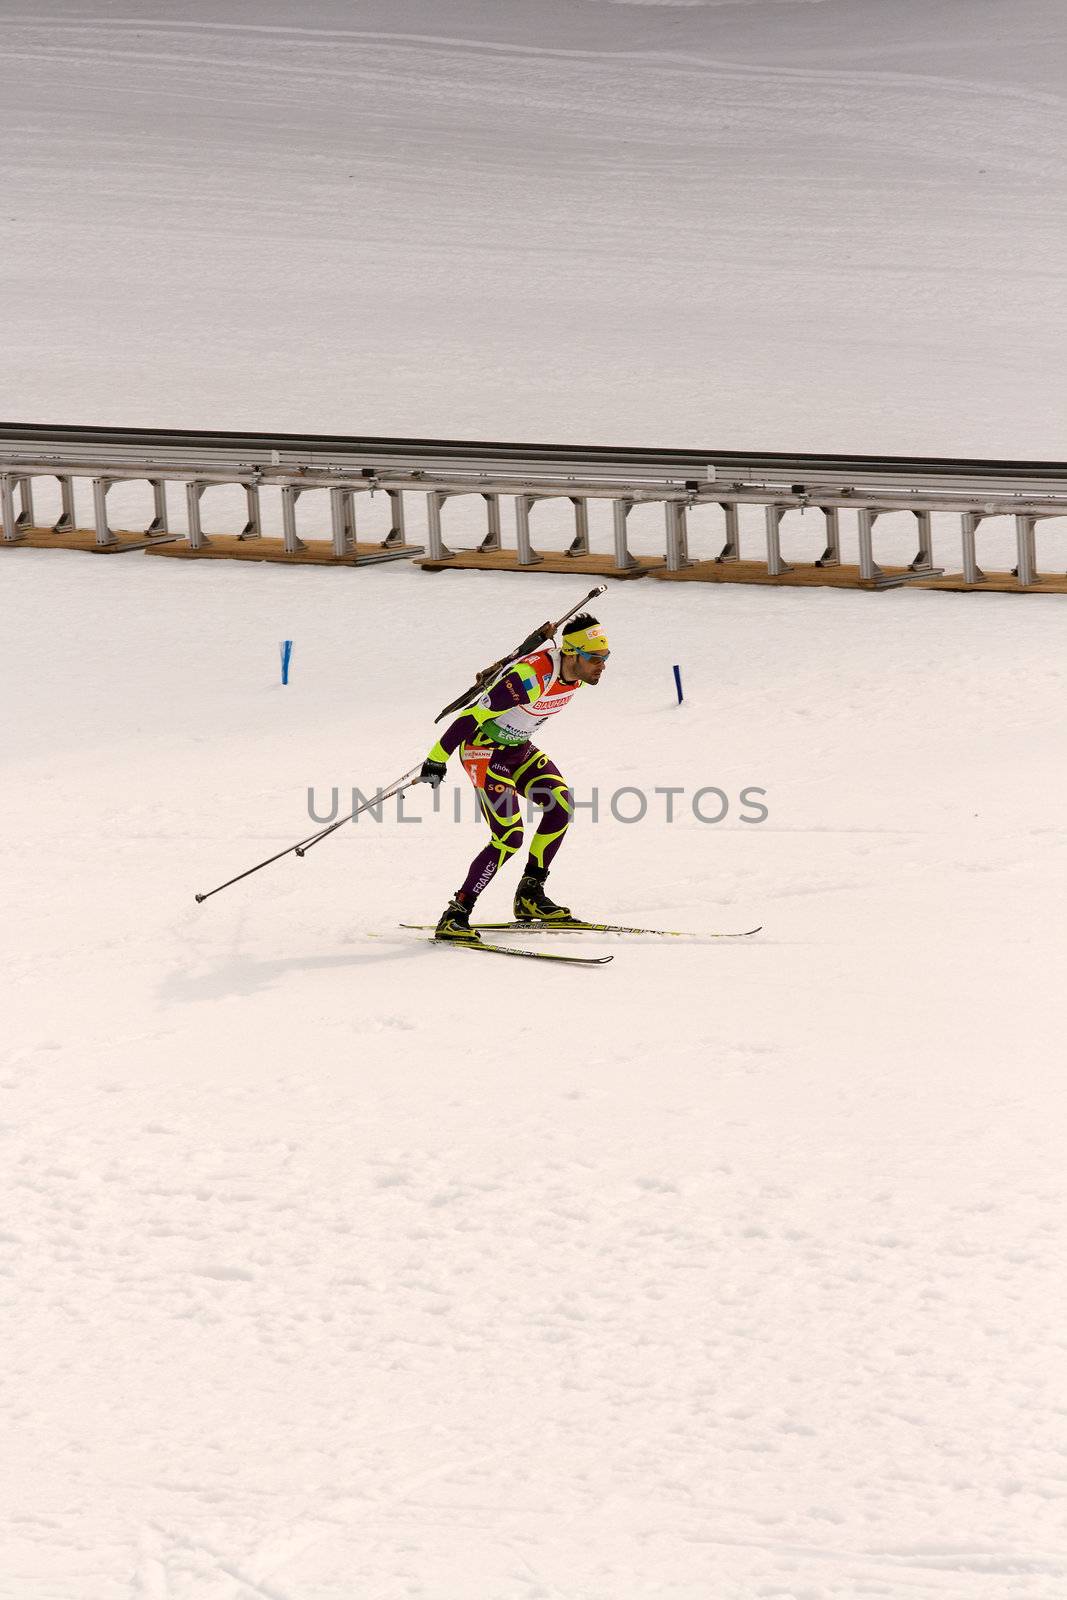 Simon Fourcade in the pursuit race at the Biathlon World Championships 2012